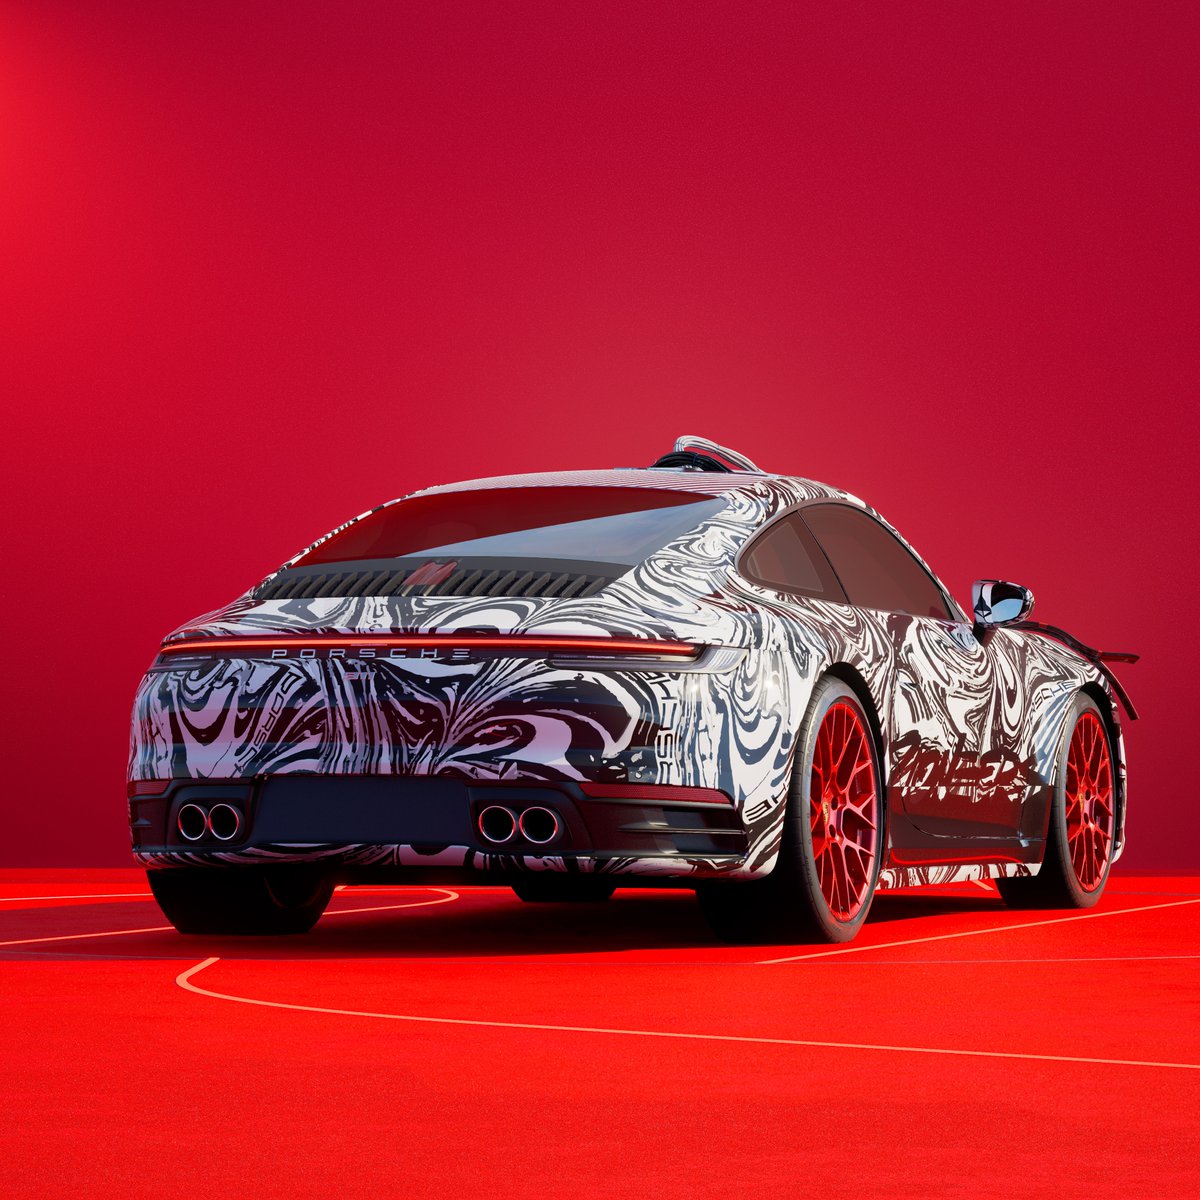 The special @patrickcandoit 'Erlking Liquid' body colour in the 3D Showroom? 🔴 A first rear-view #PorscheNFT #TuesdayLeaks. Check out the details on the Rear Lettering & Tailpipes. 🤝 Would you opt for this dreamy personalisation?